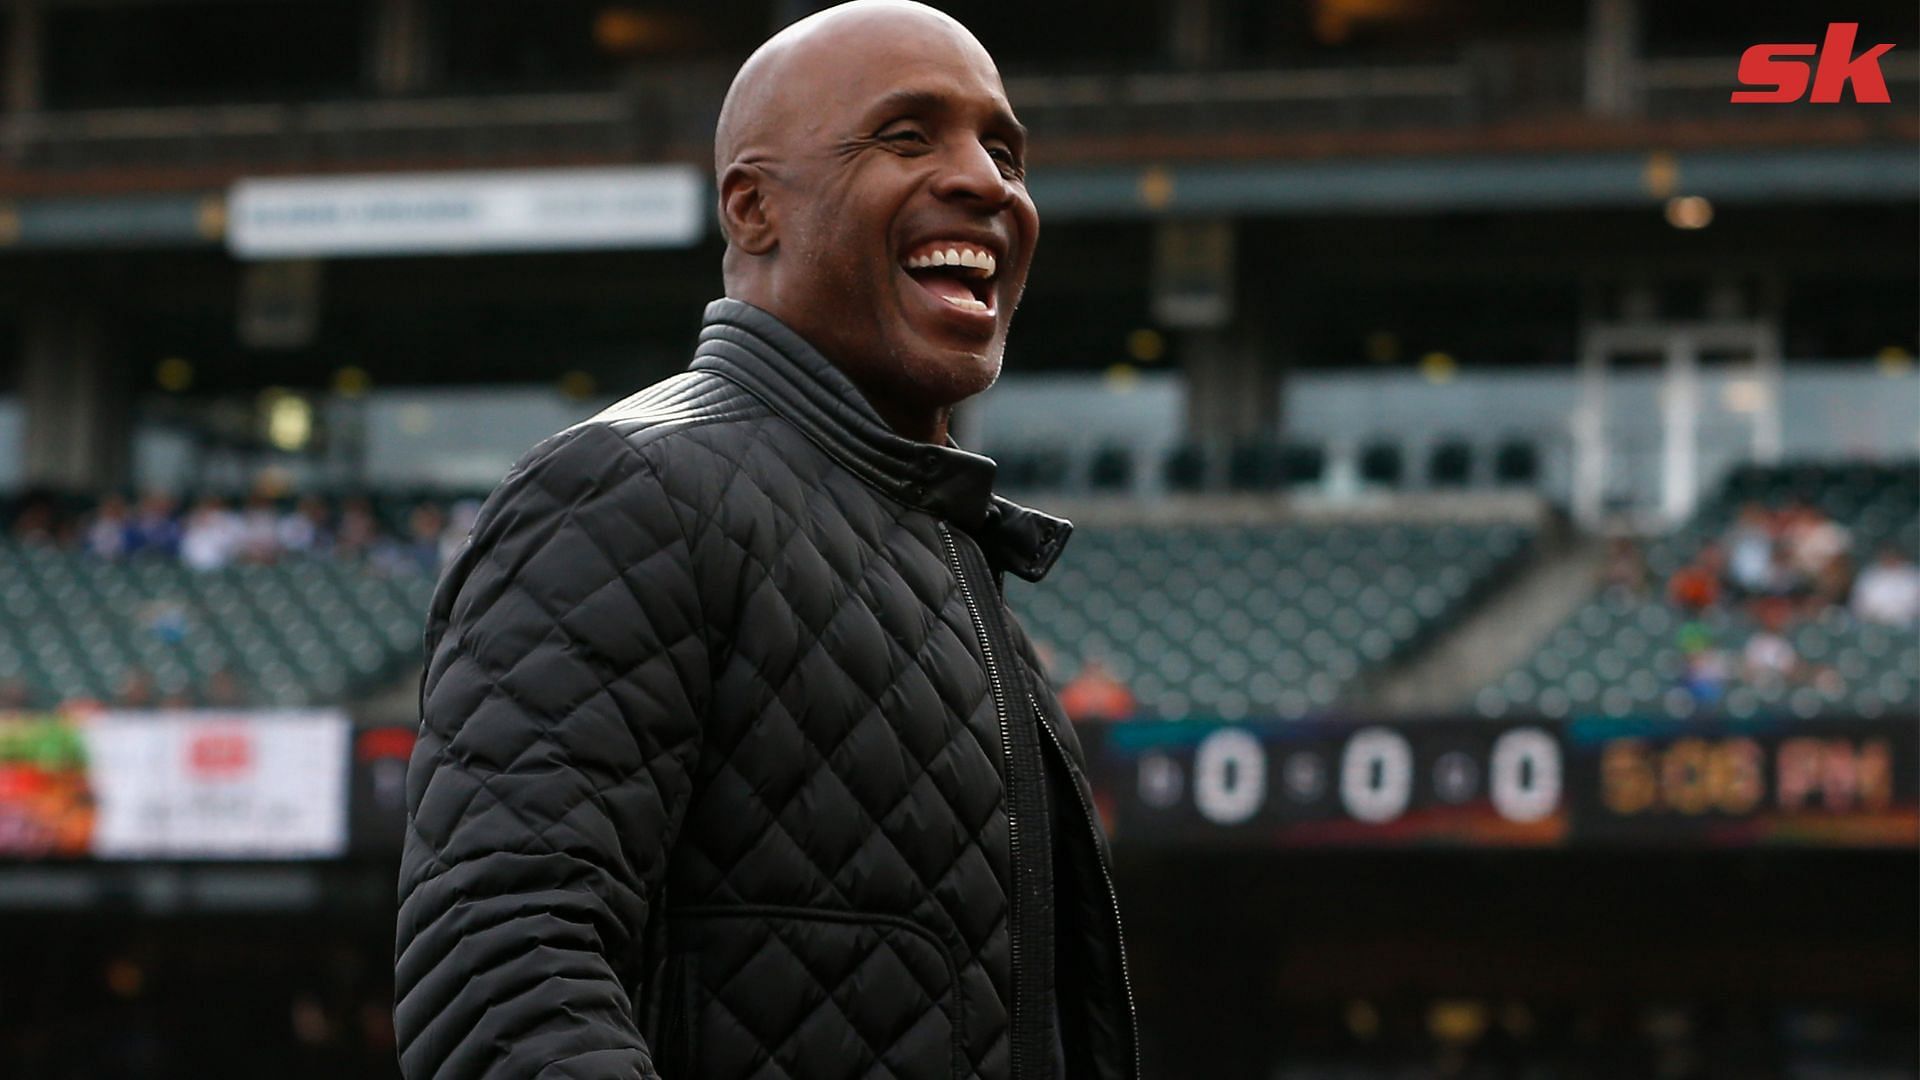 When Barry Bonds ex-girlfriend Kimberly Bell compared his selfish exploits in bed to his self-centered baseball career